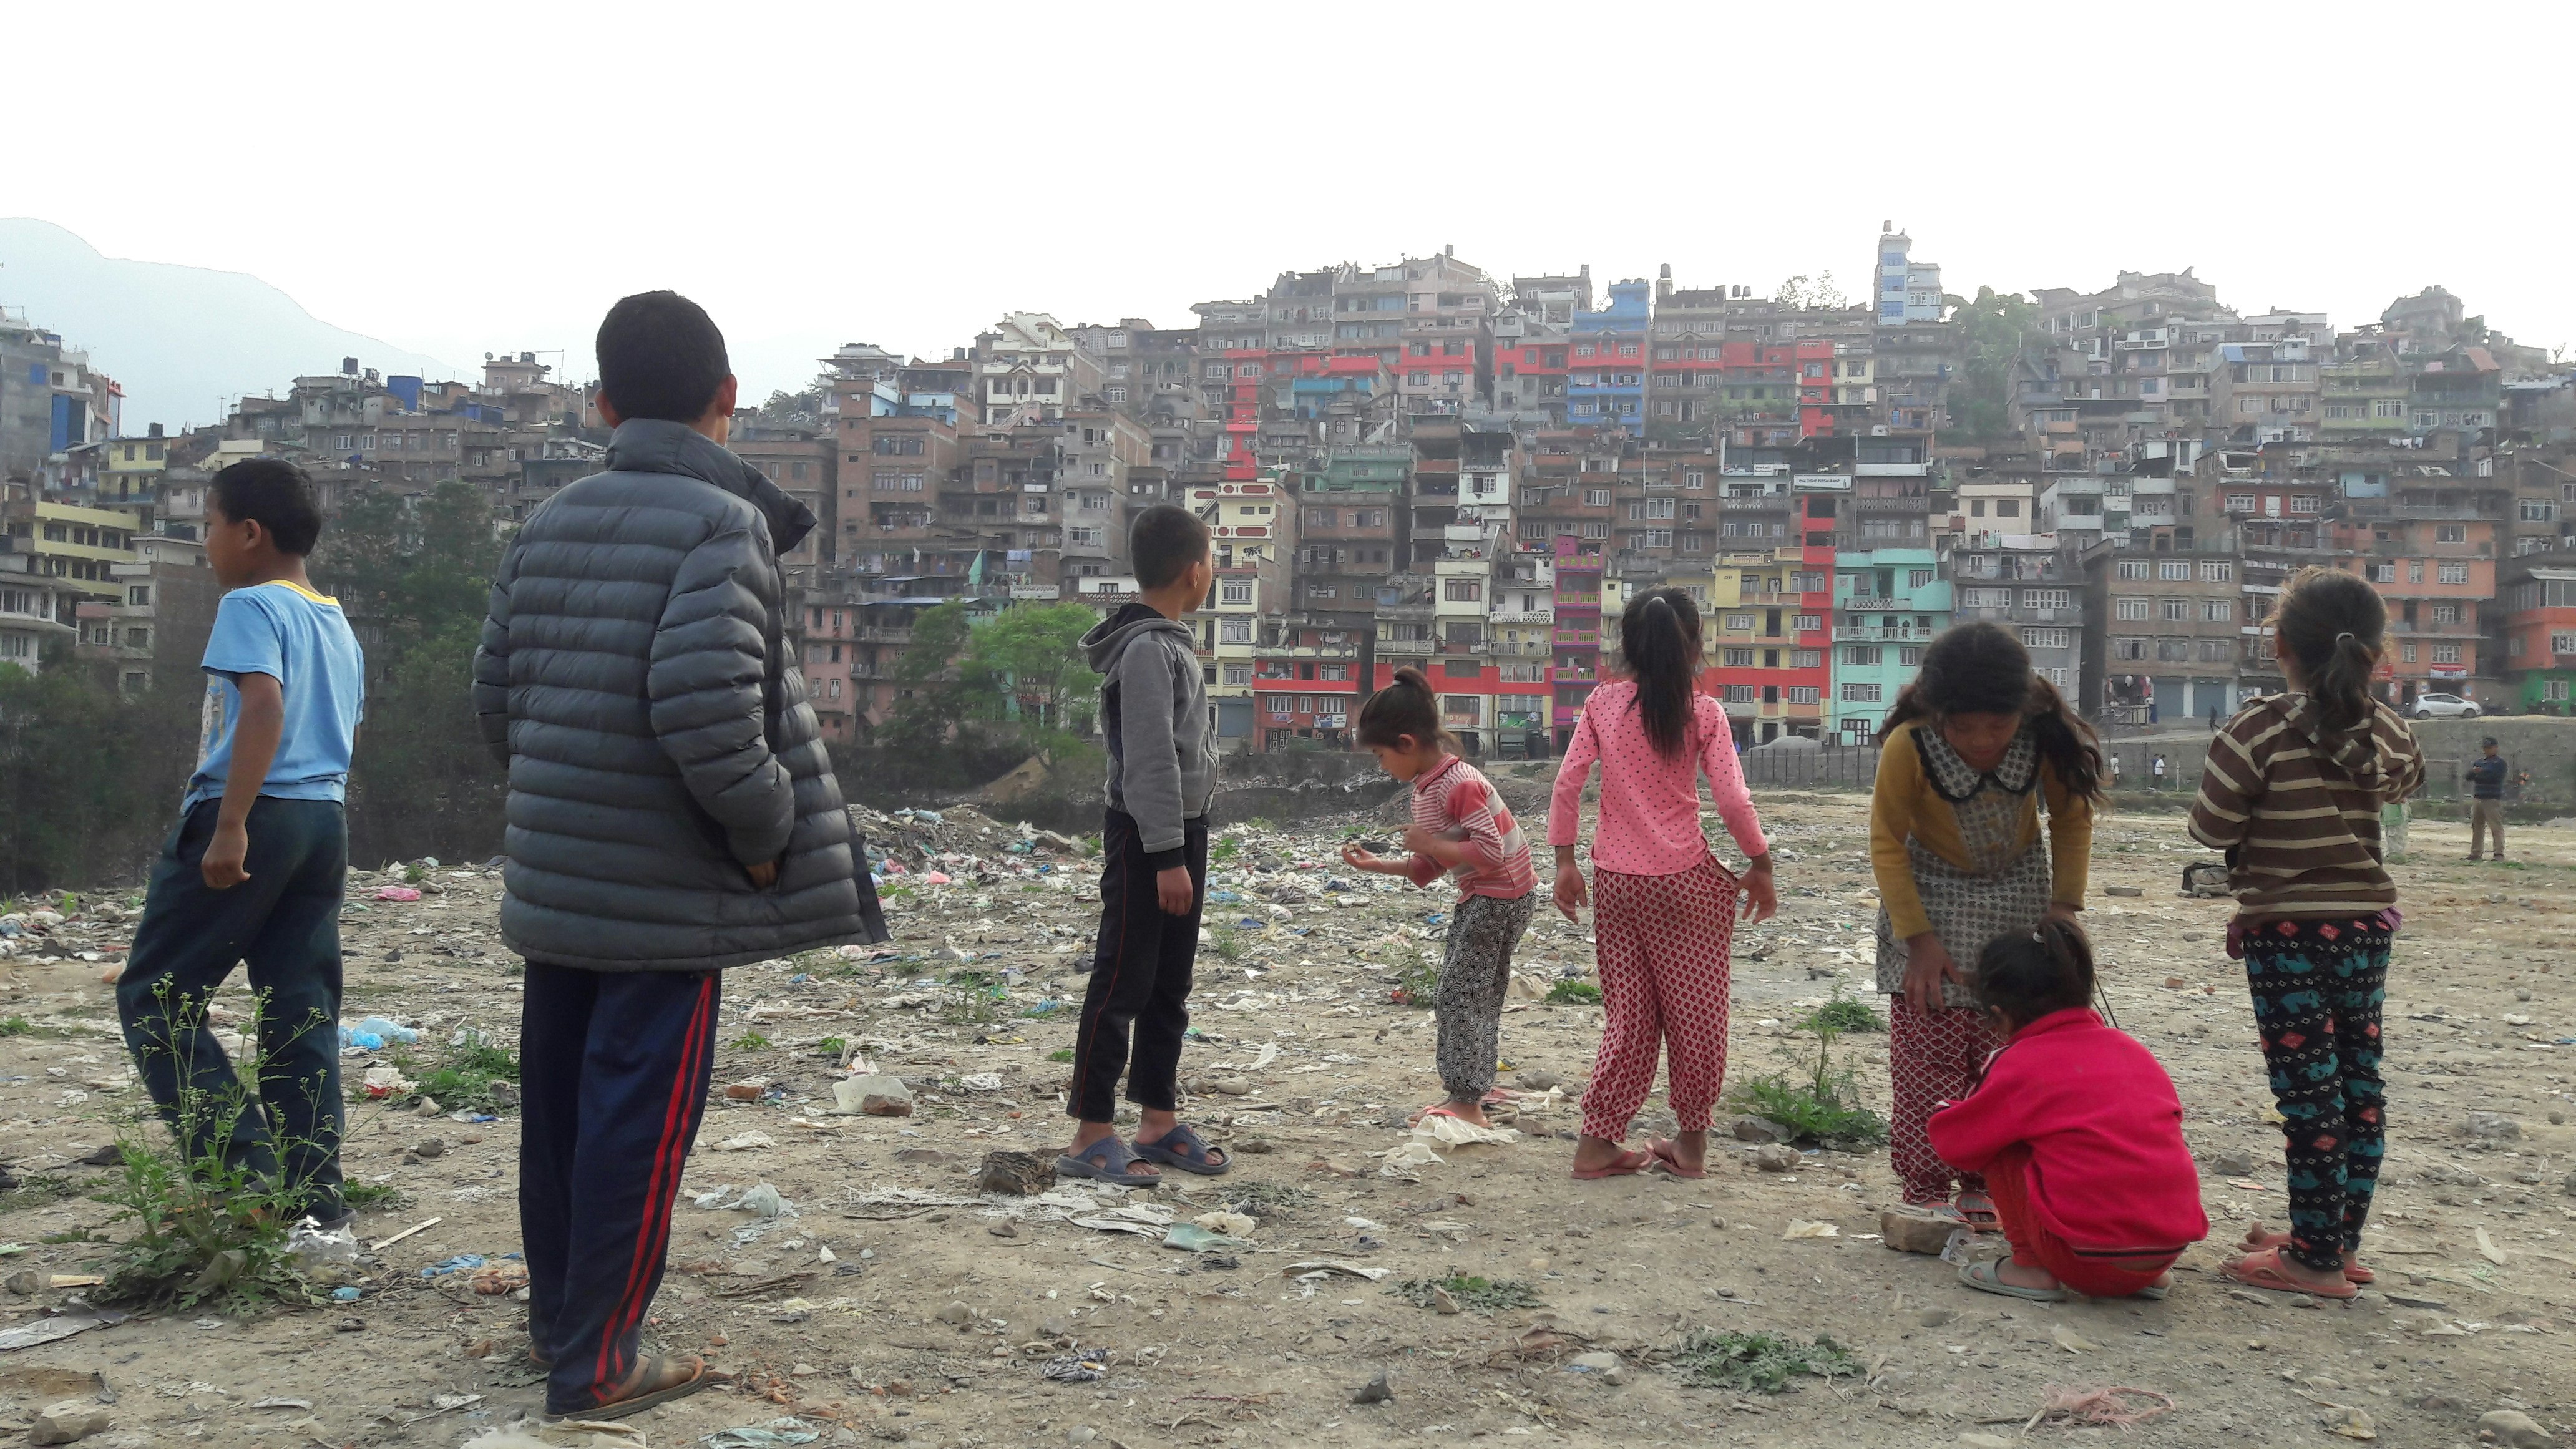 Children stand in front of a series of apartment houses in Kathmandu. A monumental rectangle is painted in red across multiple apartment facades.